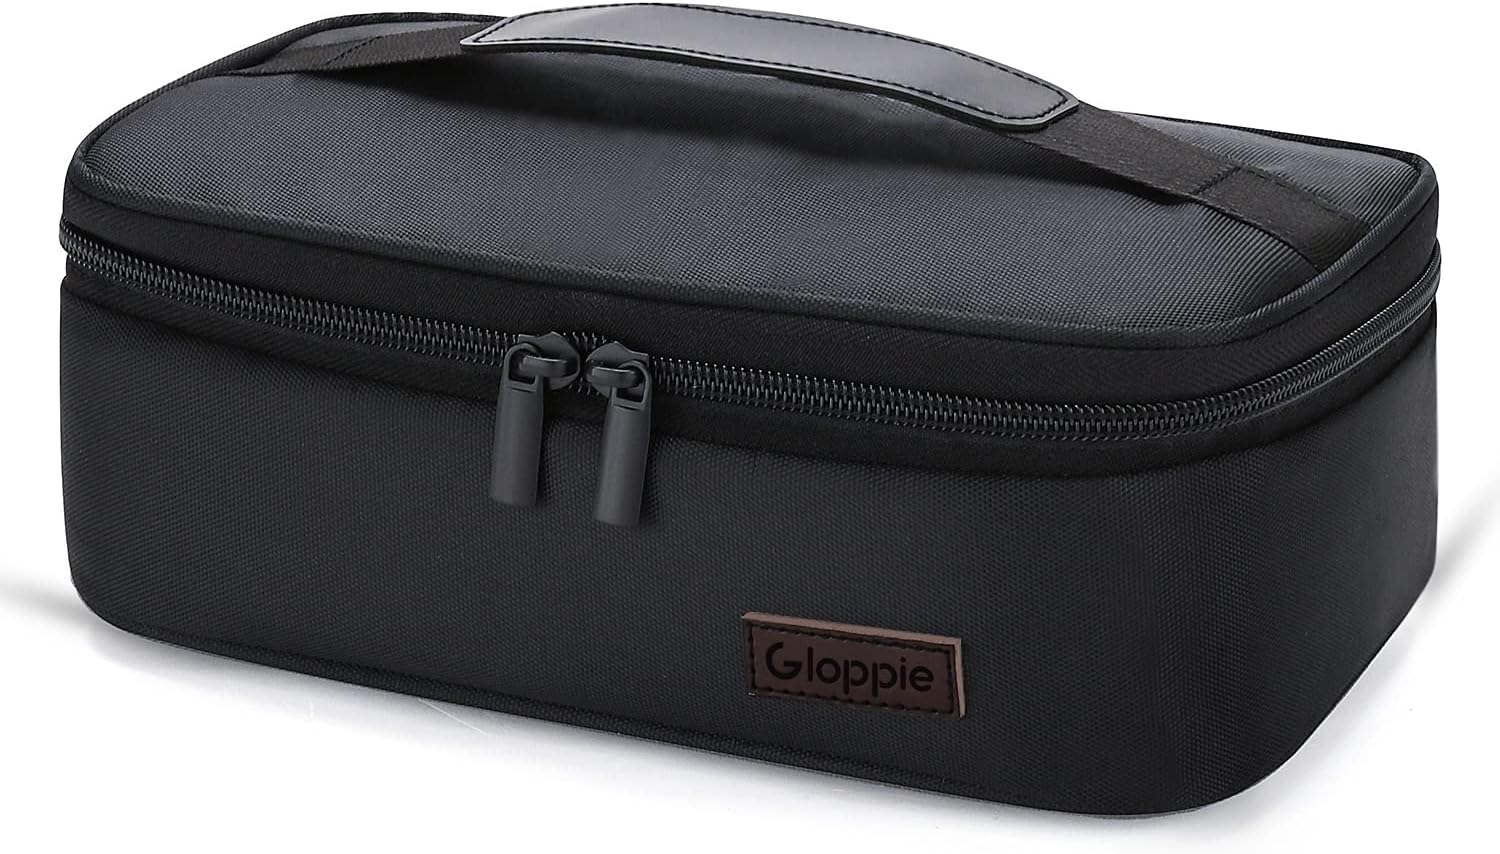 Gloppie Small Lunch Bag for Men Women Insulated Lunch Box Mini Lunchbox Kids Lunch Box Bag Adult Portable Cooler Bags Reusable Snack Bag Black